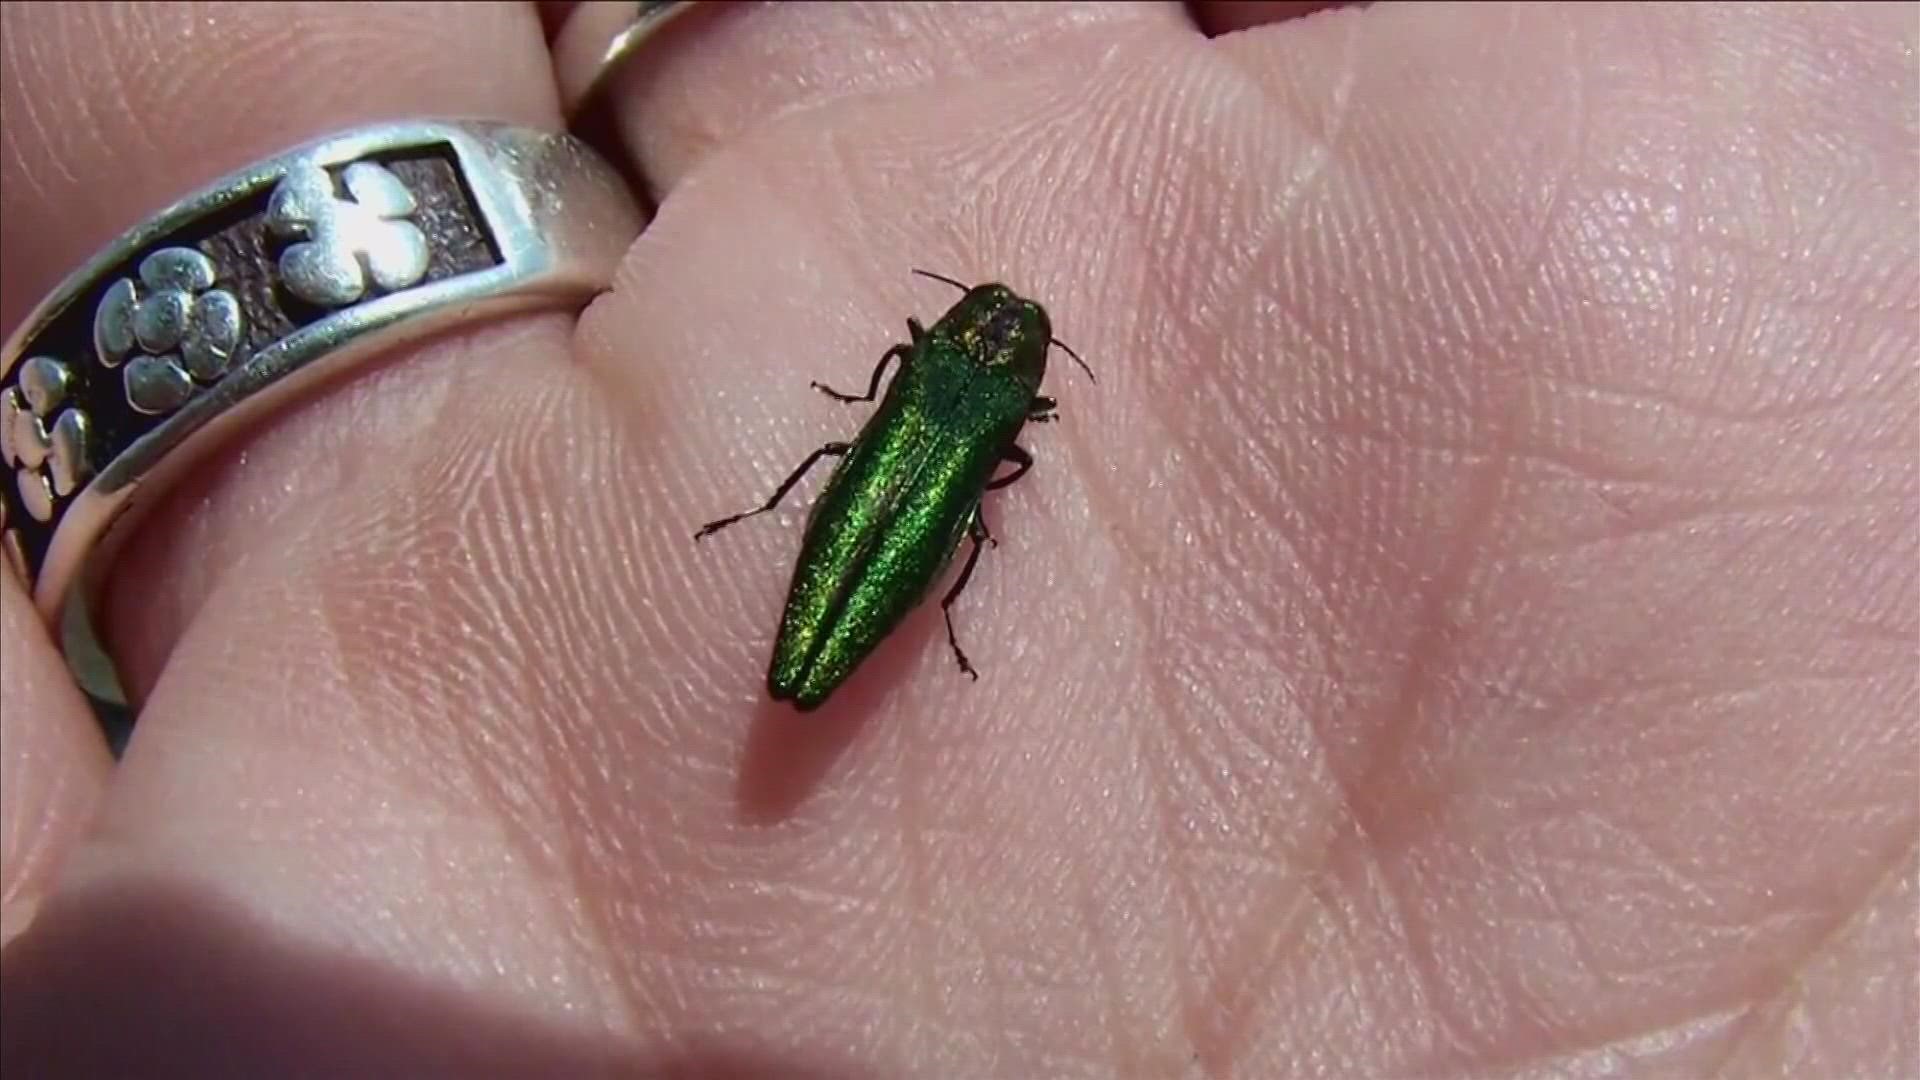 Maine Forest service issues emergency order preventing trees in certain areas from being moved because of the Emerald Ash Borers